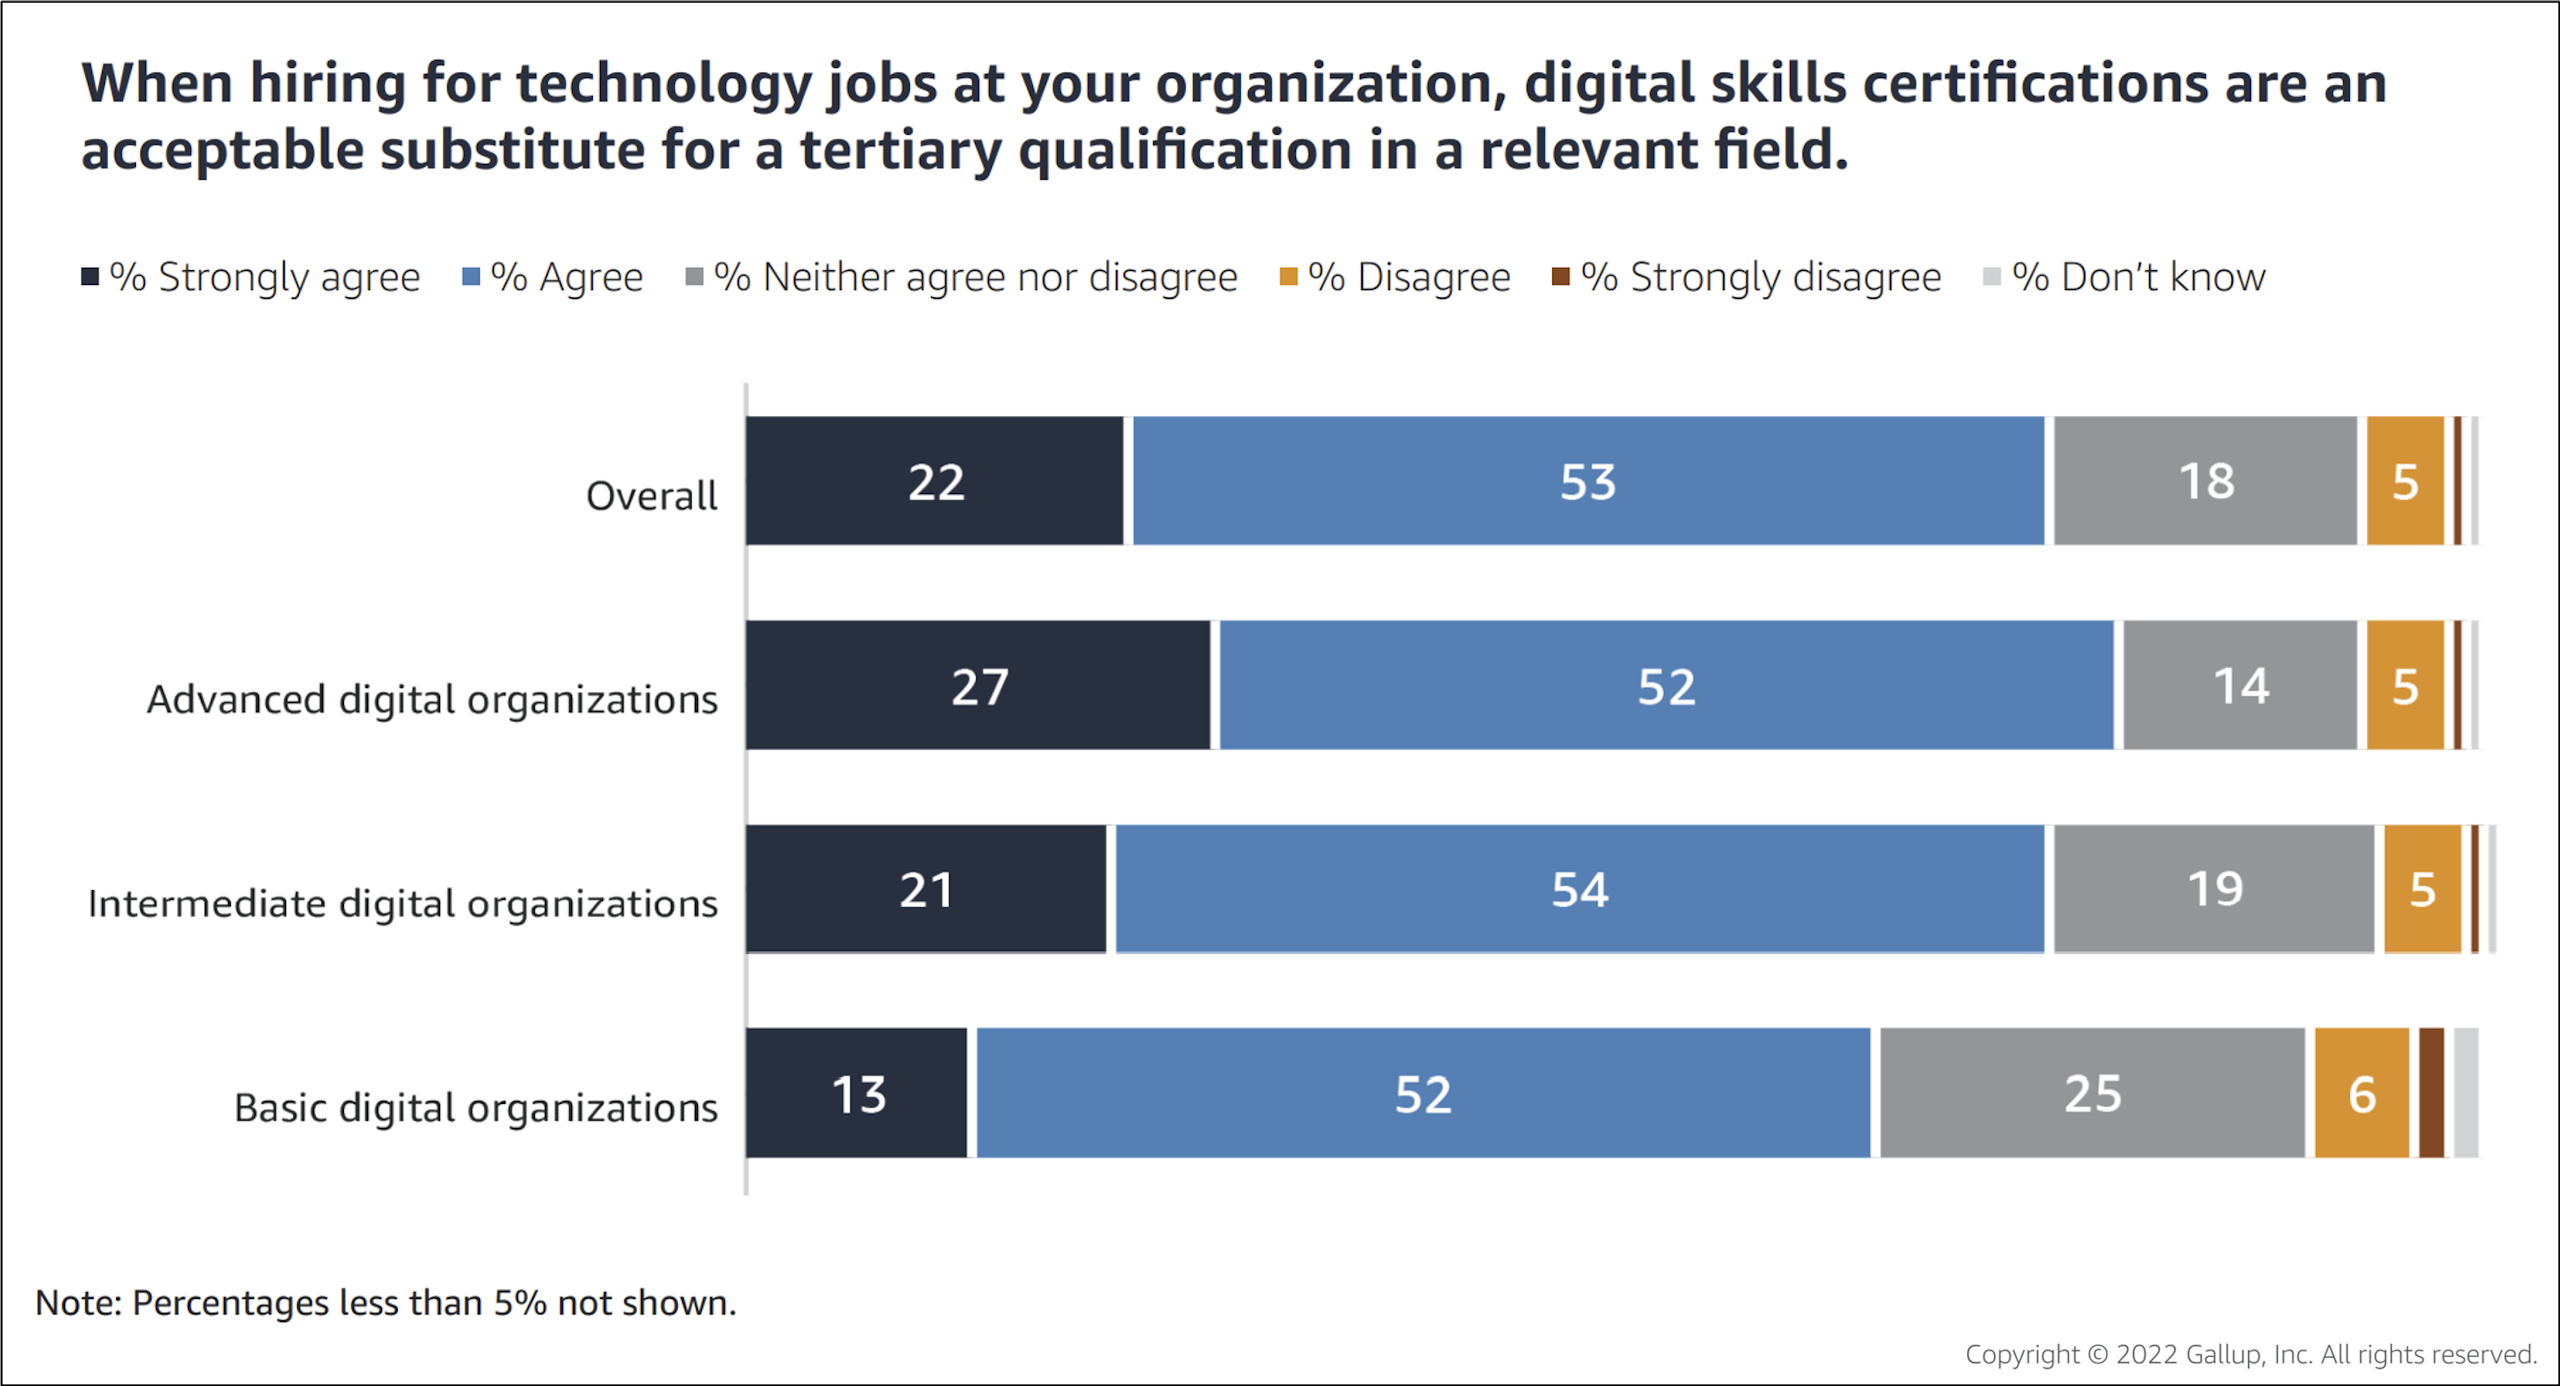 Digital skills certifications are an acceptable substitute for a tertiary qualification